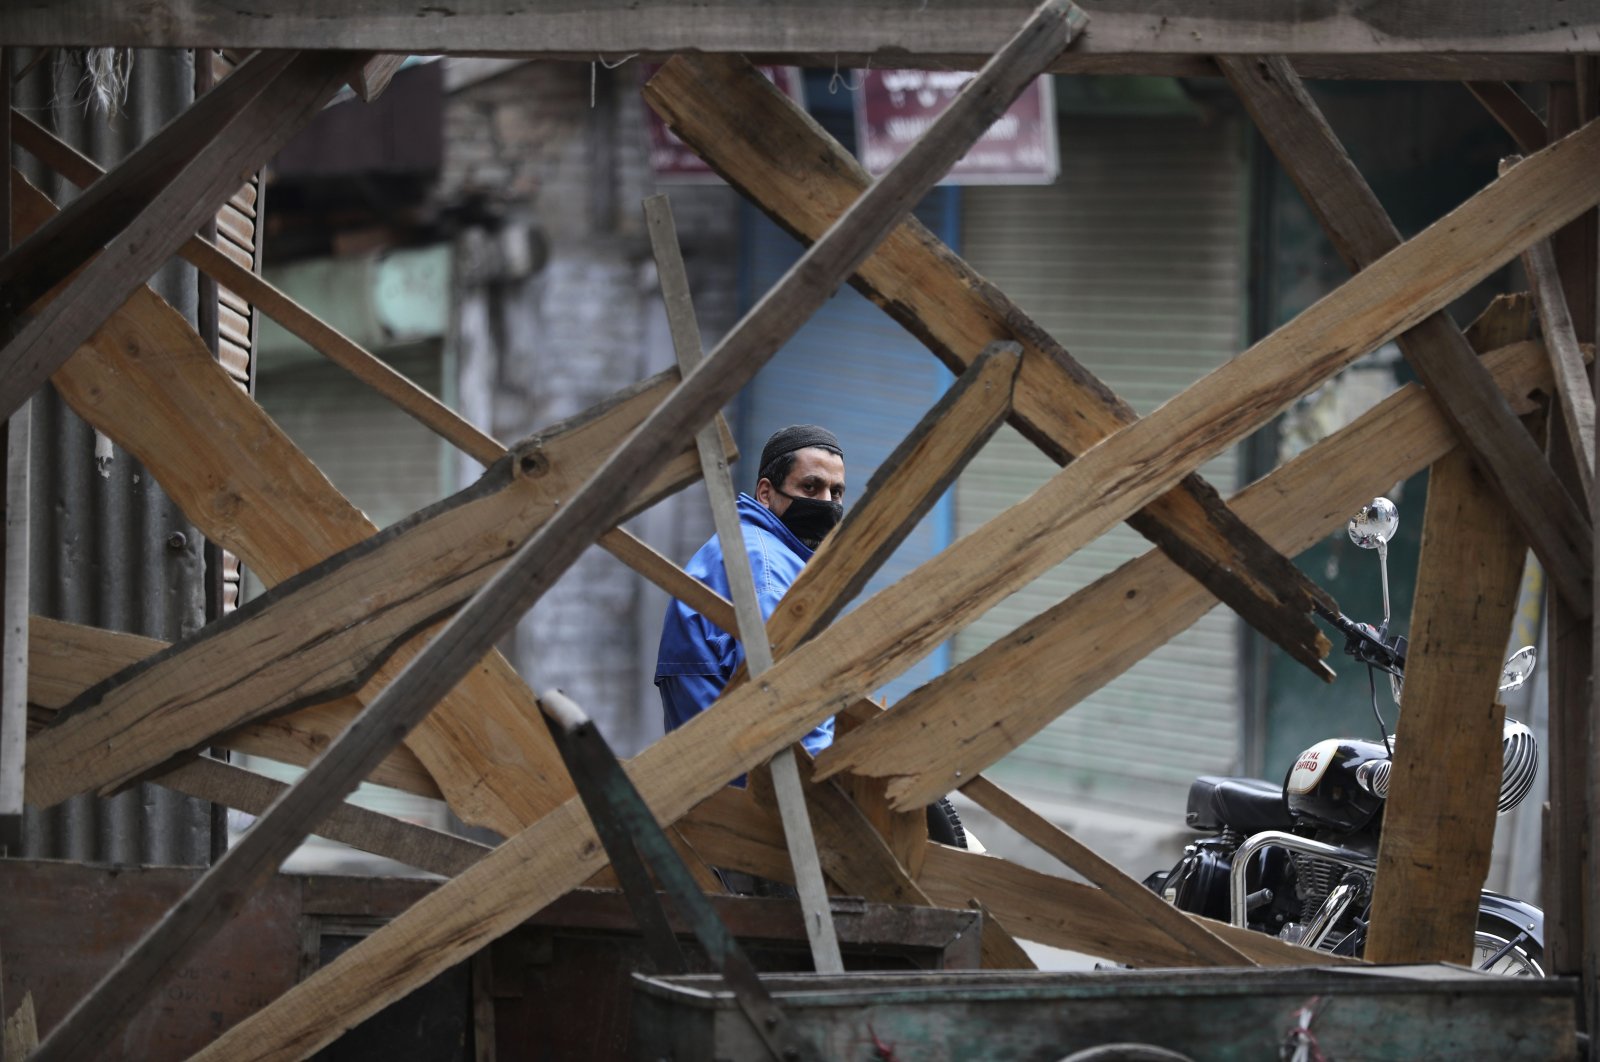 A Kashmiri volunteer looks through temporary barricades erected to prevent outsiders from entering an area declared as red zone by the government during lockdown in Srinagar, Indian controlled Kashmir, Tuesday, April 14, 2020. (AP Photo)